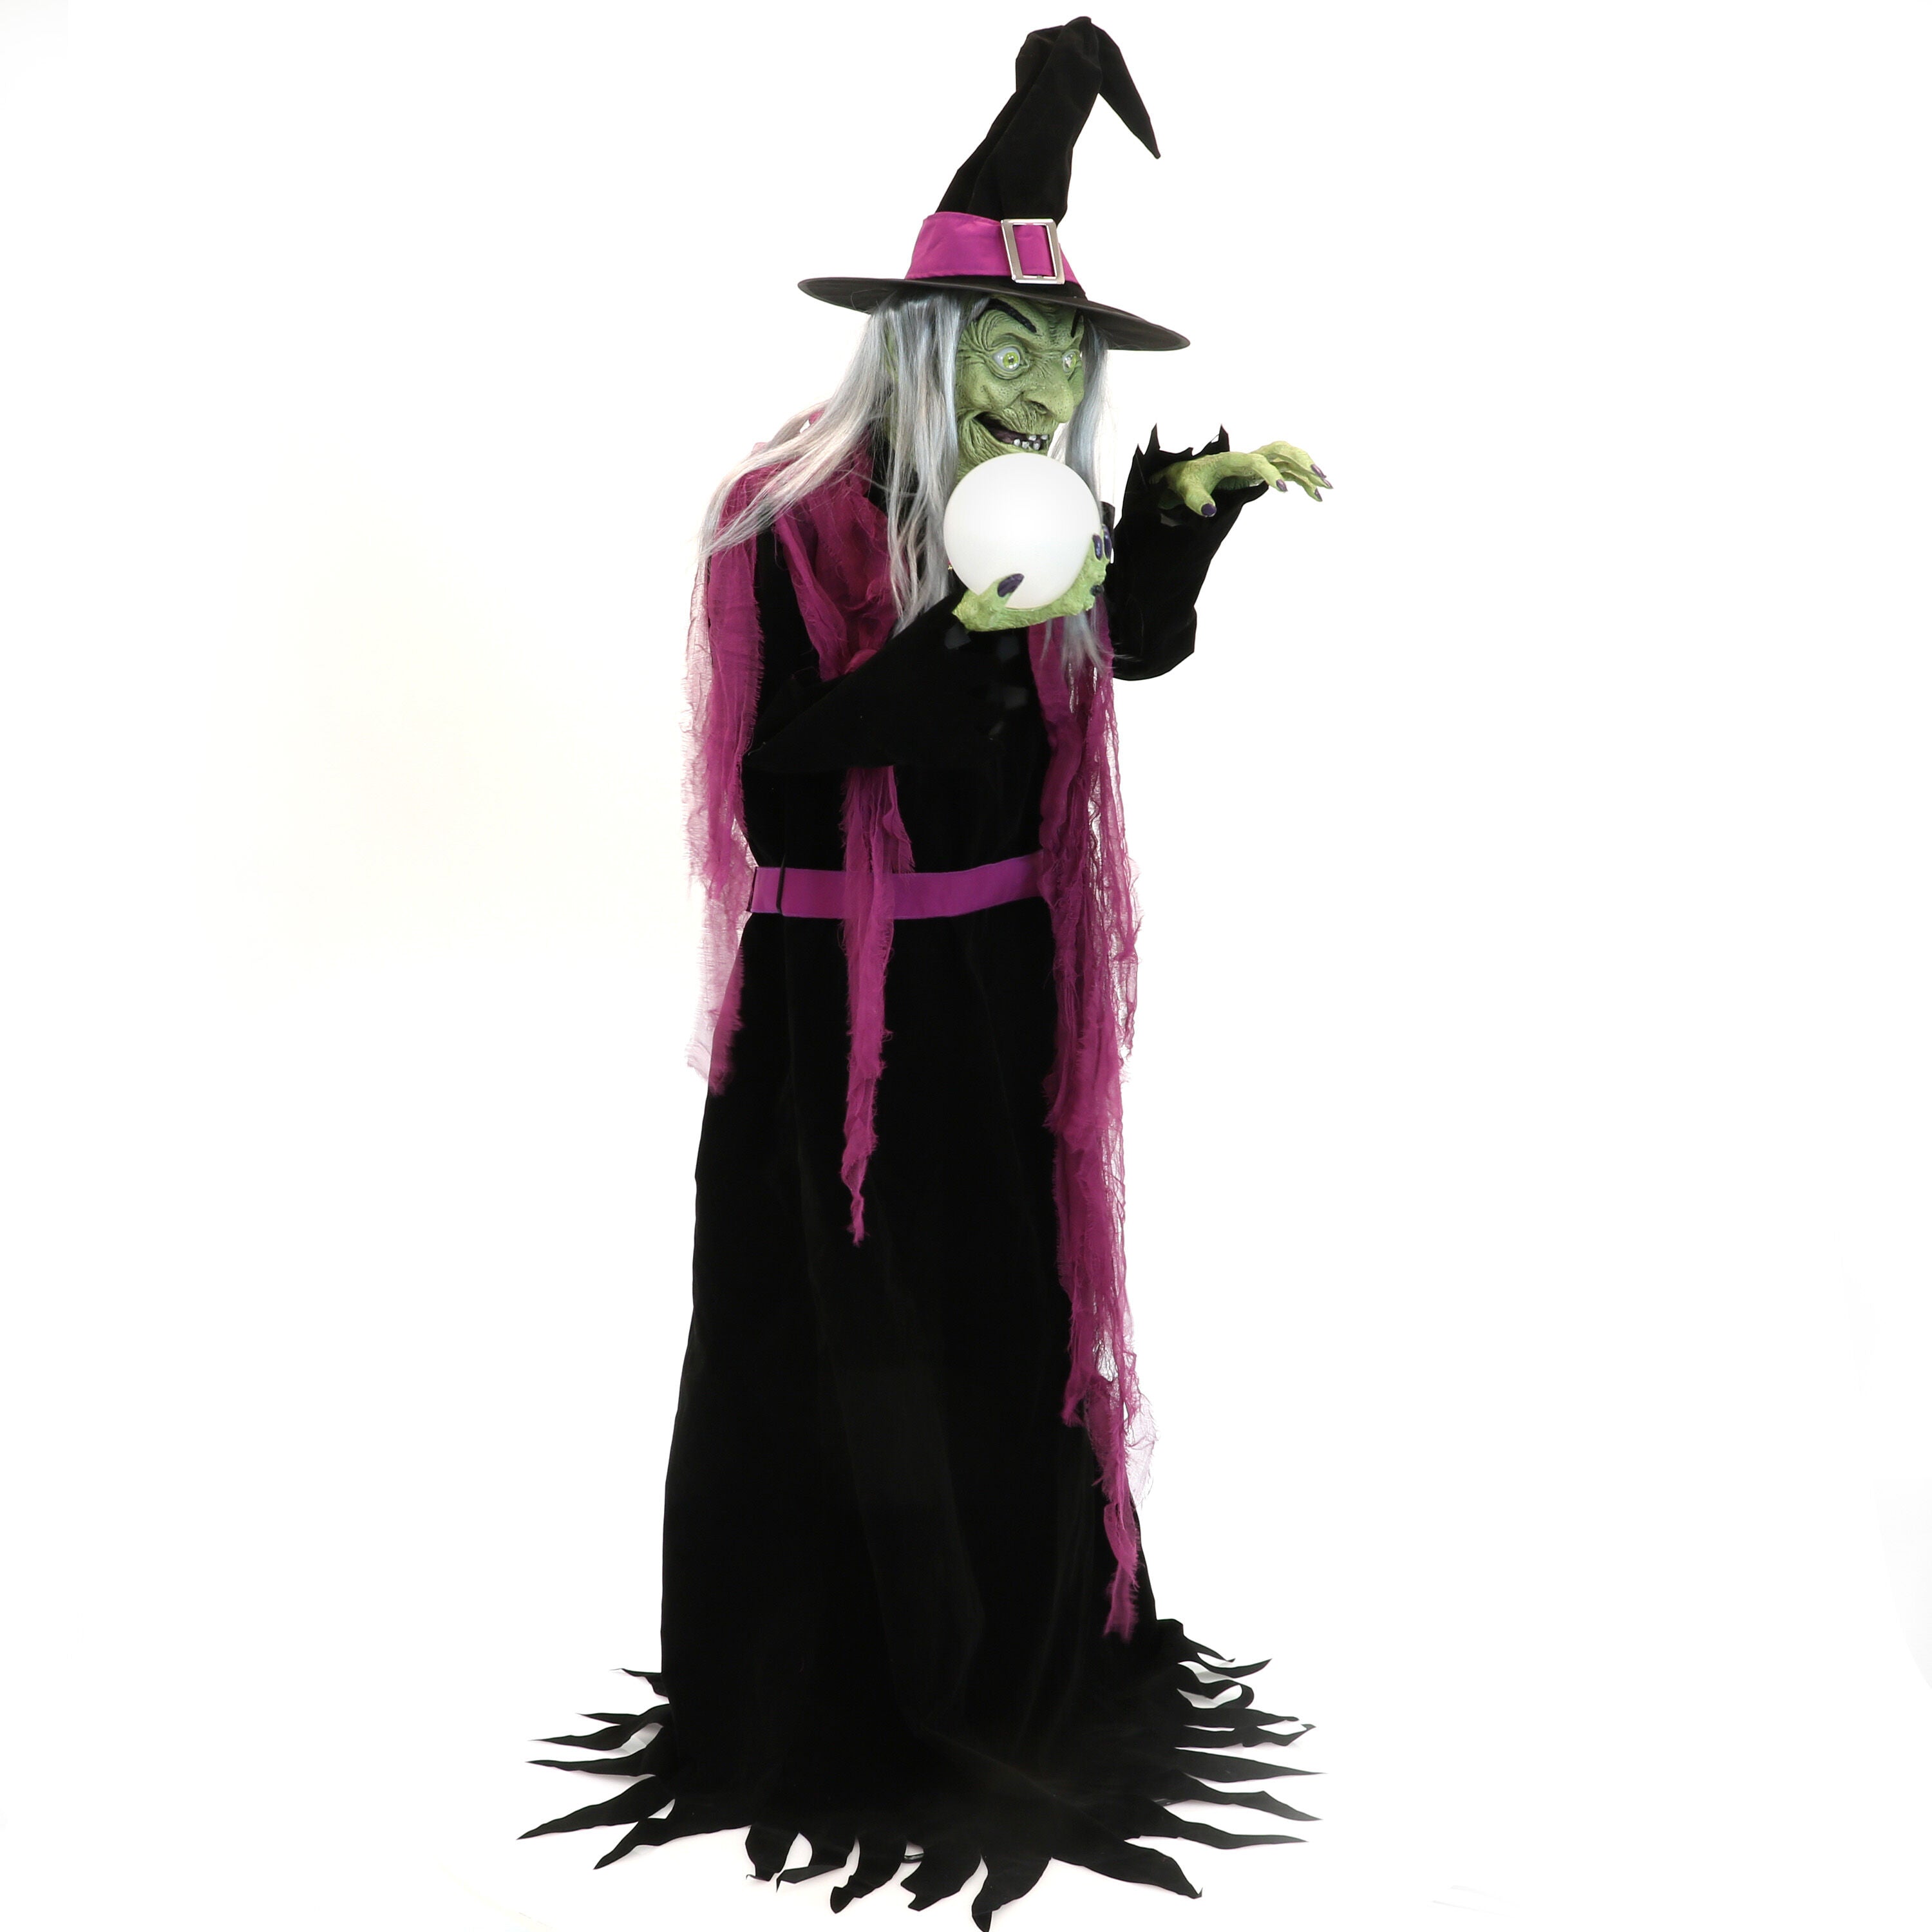 Haunted Hill Farm - 6-Ft. Tall Motion-Activated Fortune Teller Witch by SVI, Premium Talking Halloween Animatronic, Plug-In